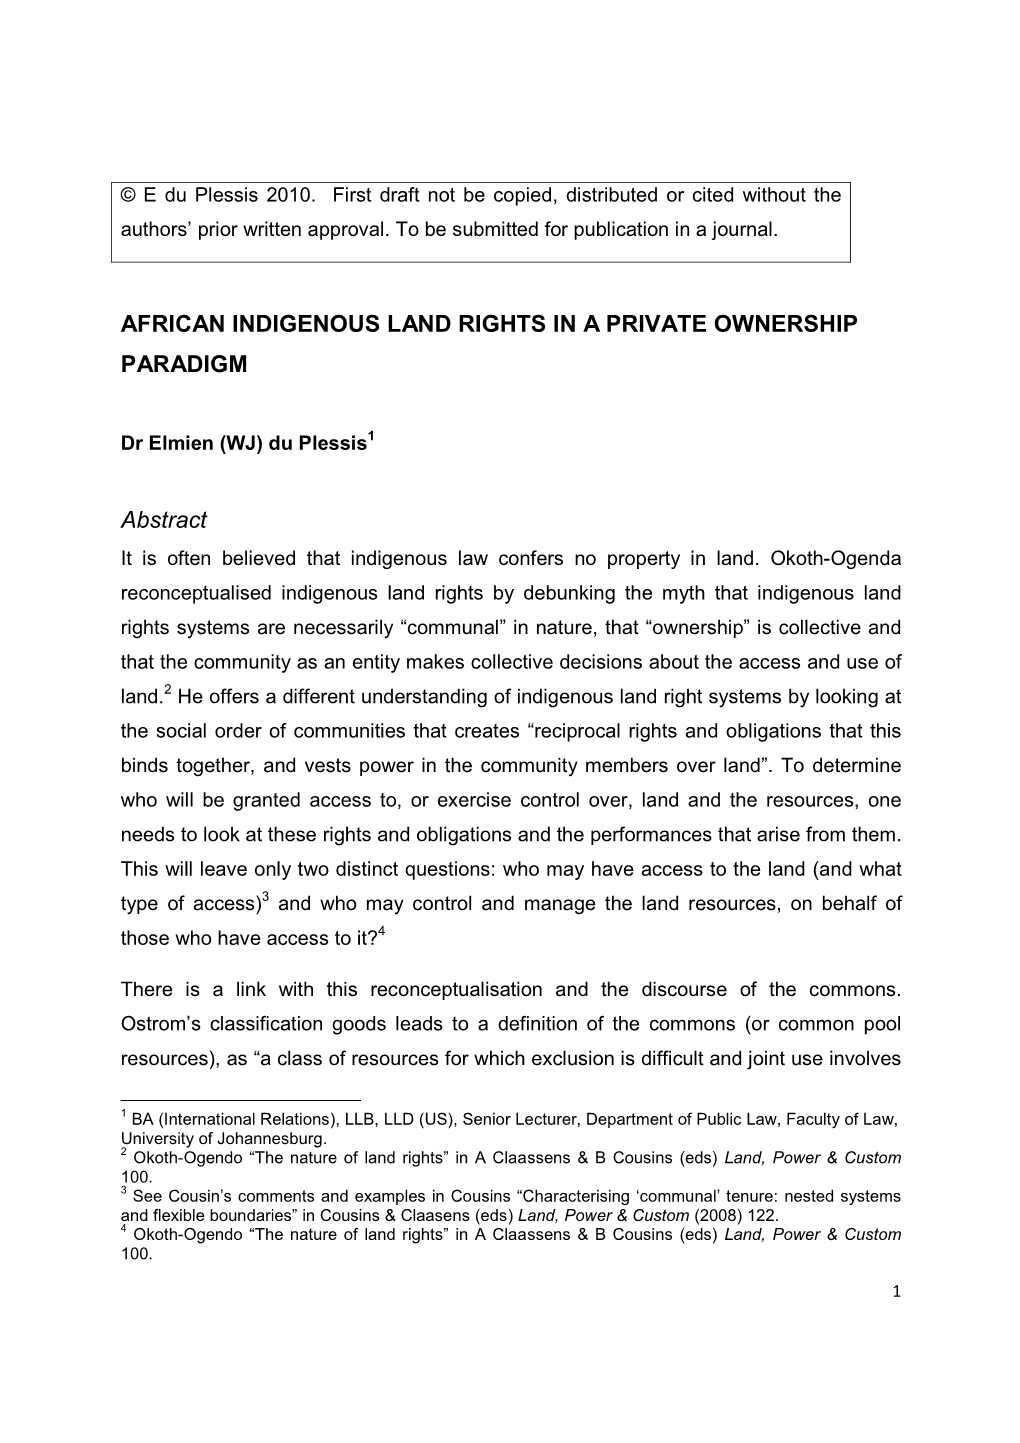 AFRICAN INDIGENOUS LAND RIGHTS in a PRIVATE OWNERSHIP PARADIGM Abstract